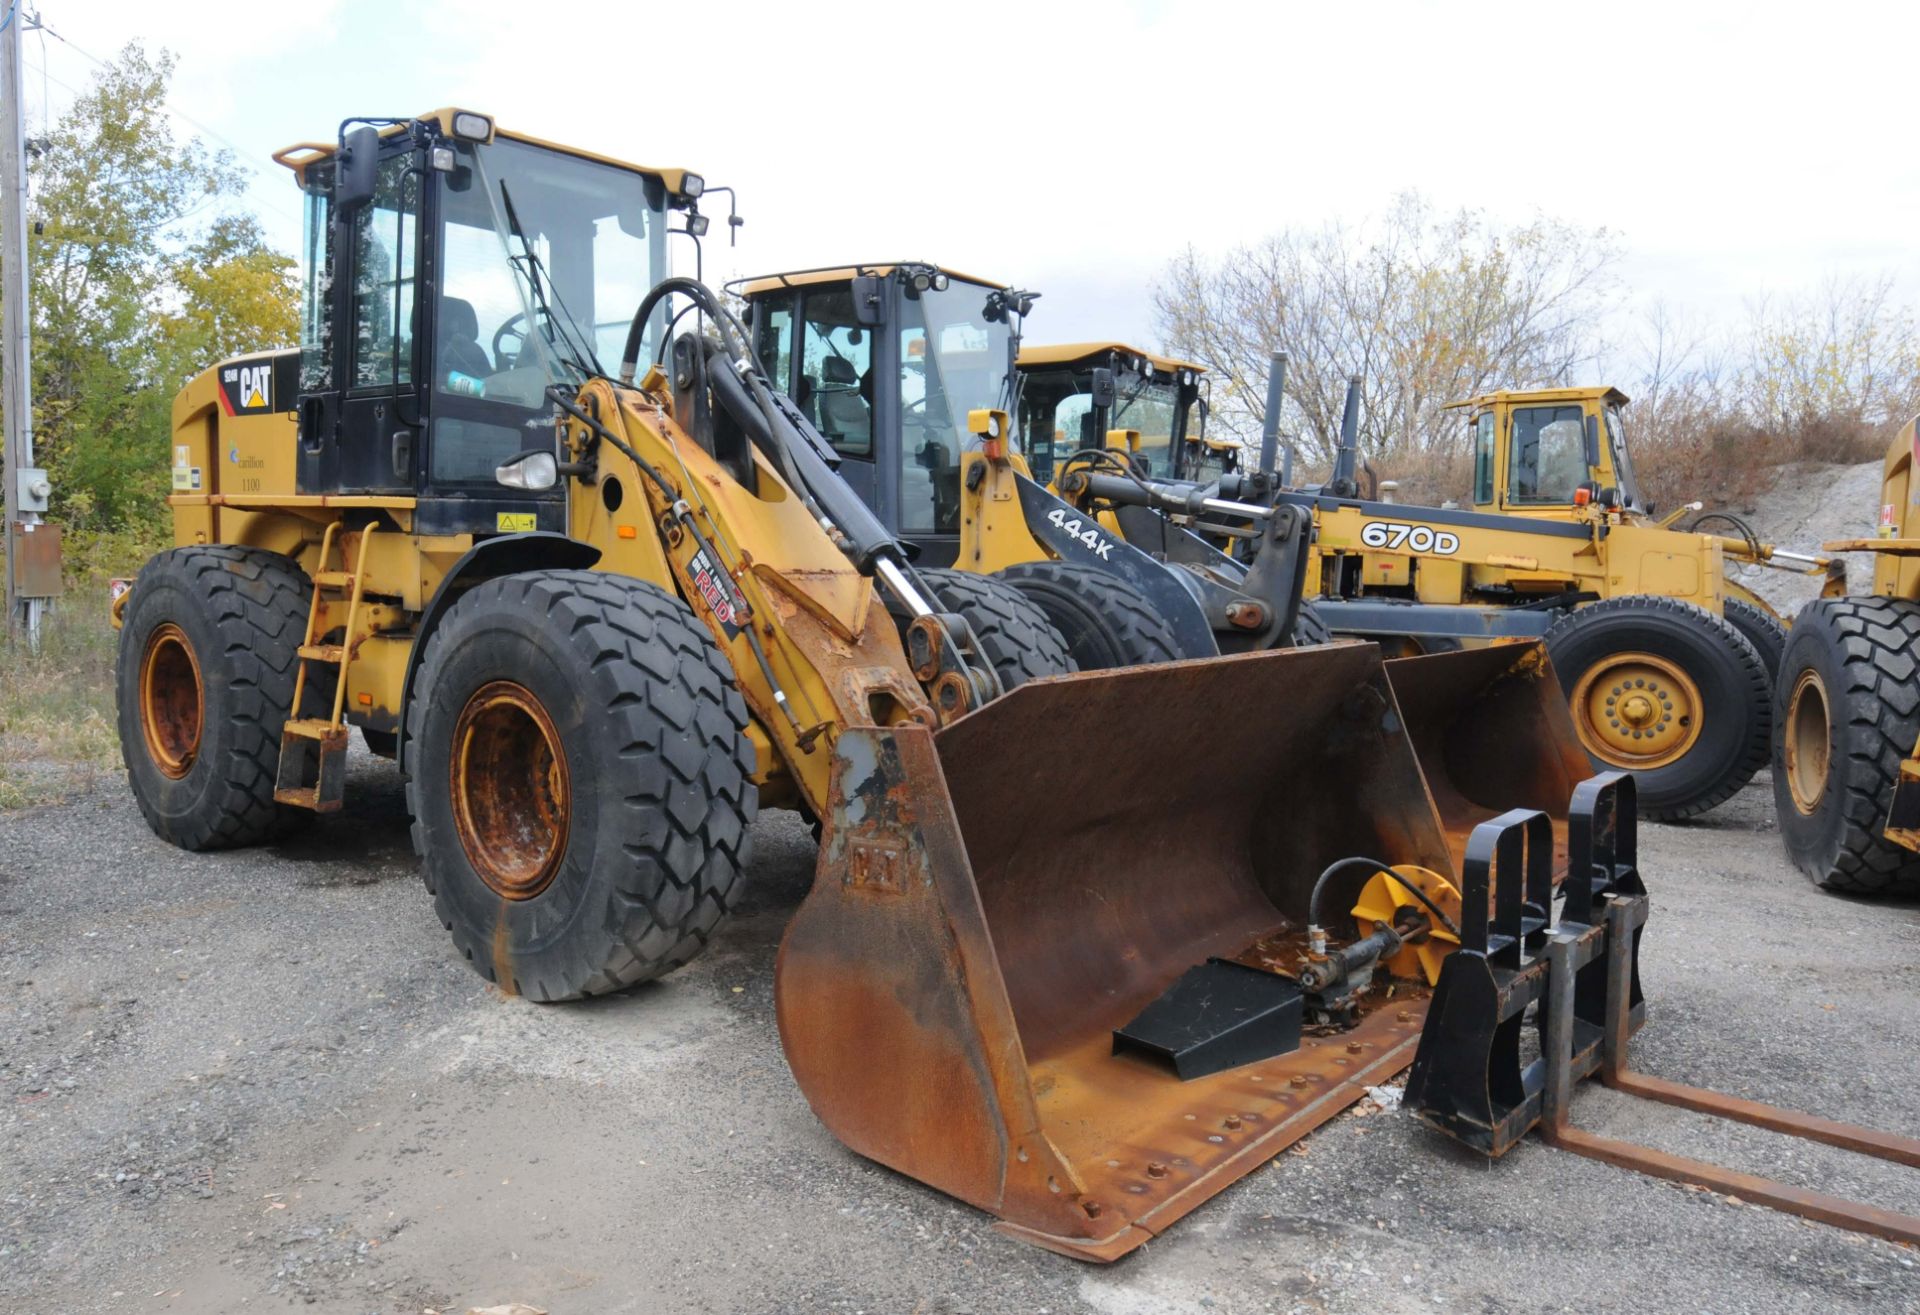 CATERPILLAR (2011) 924H ARTICULATING FRONT END WHEEL LOADER WITH CAT FORK ATTACHMENT, APPROX. 7, - Image 2 of 18